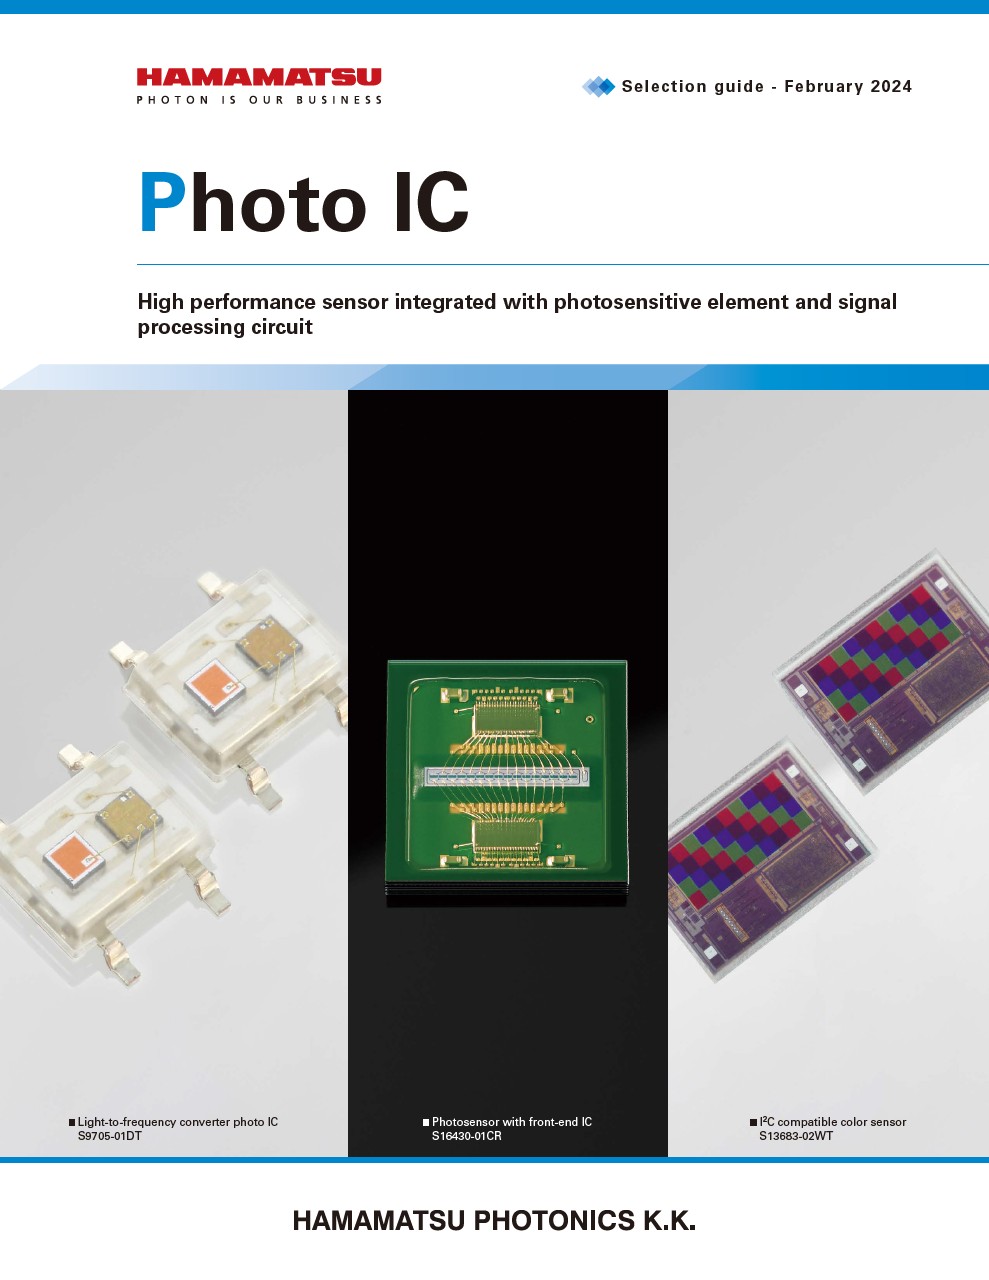 Selection guide / Photo IC